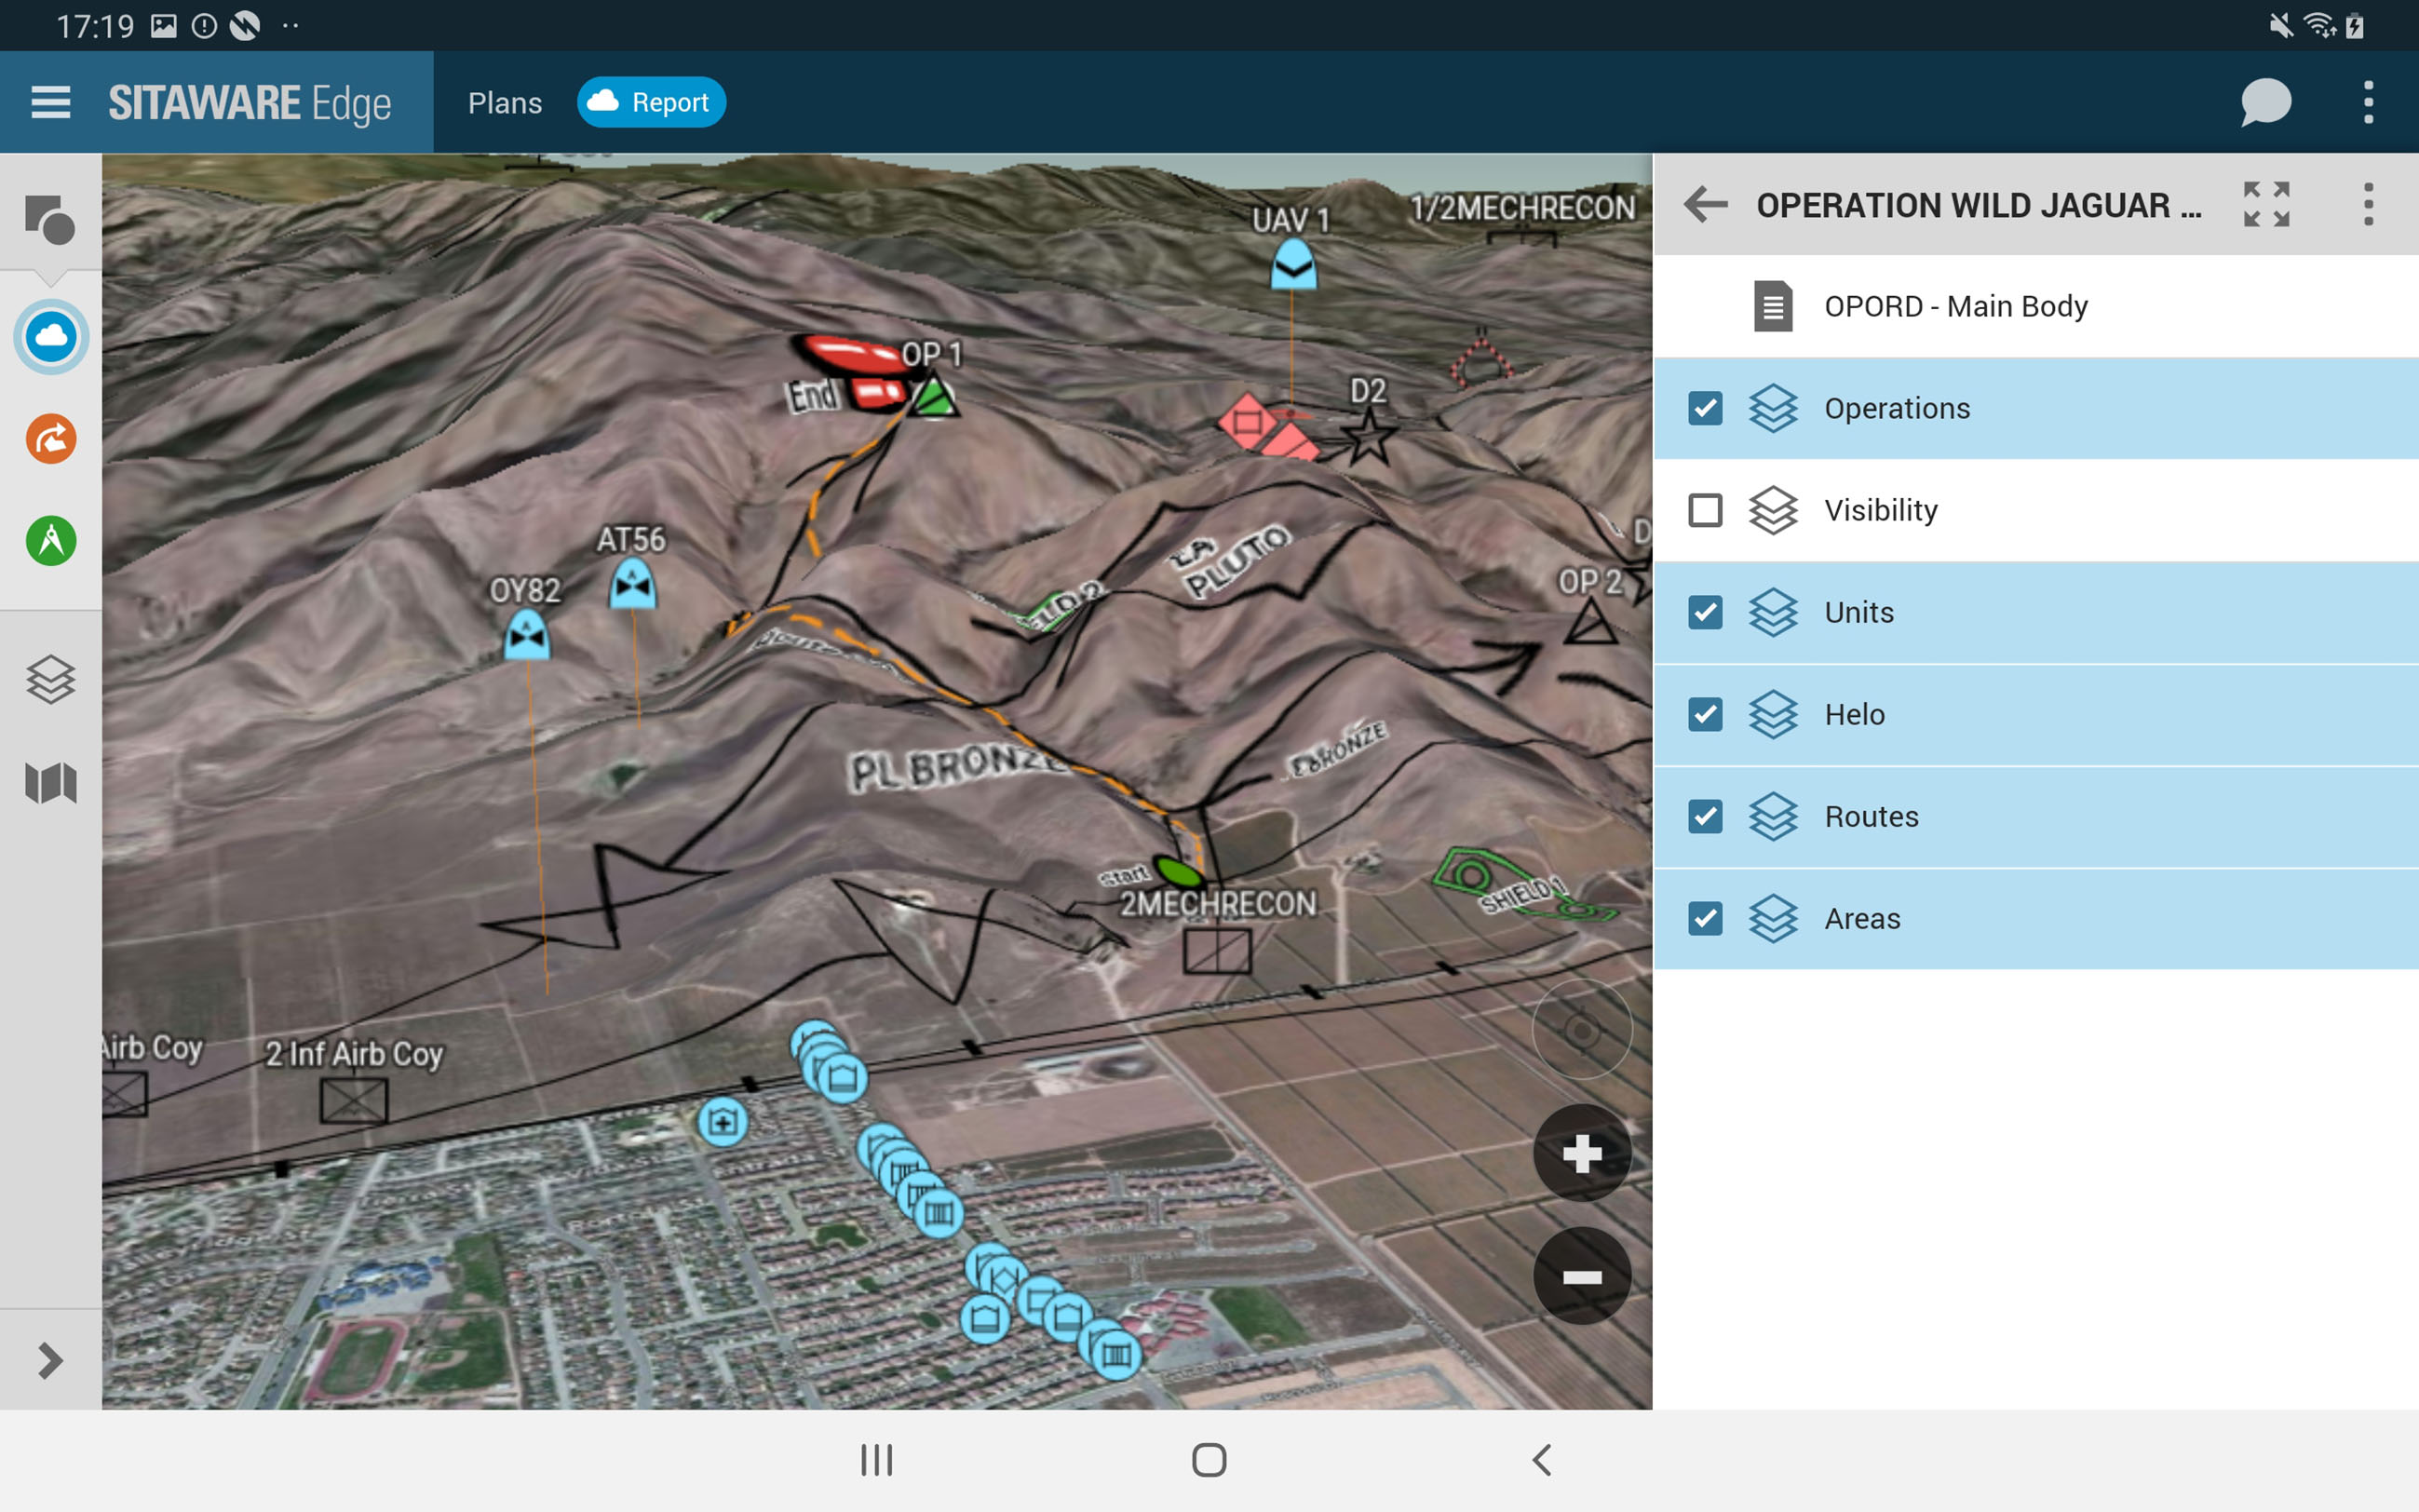 Improvements to SitaWare Edge 2.0 include a 3D map, the same employed on the SitaWare Headquarters system. 